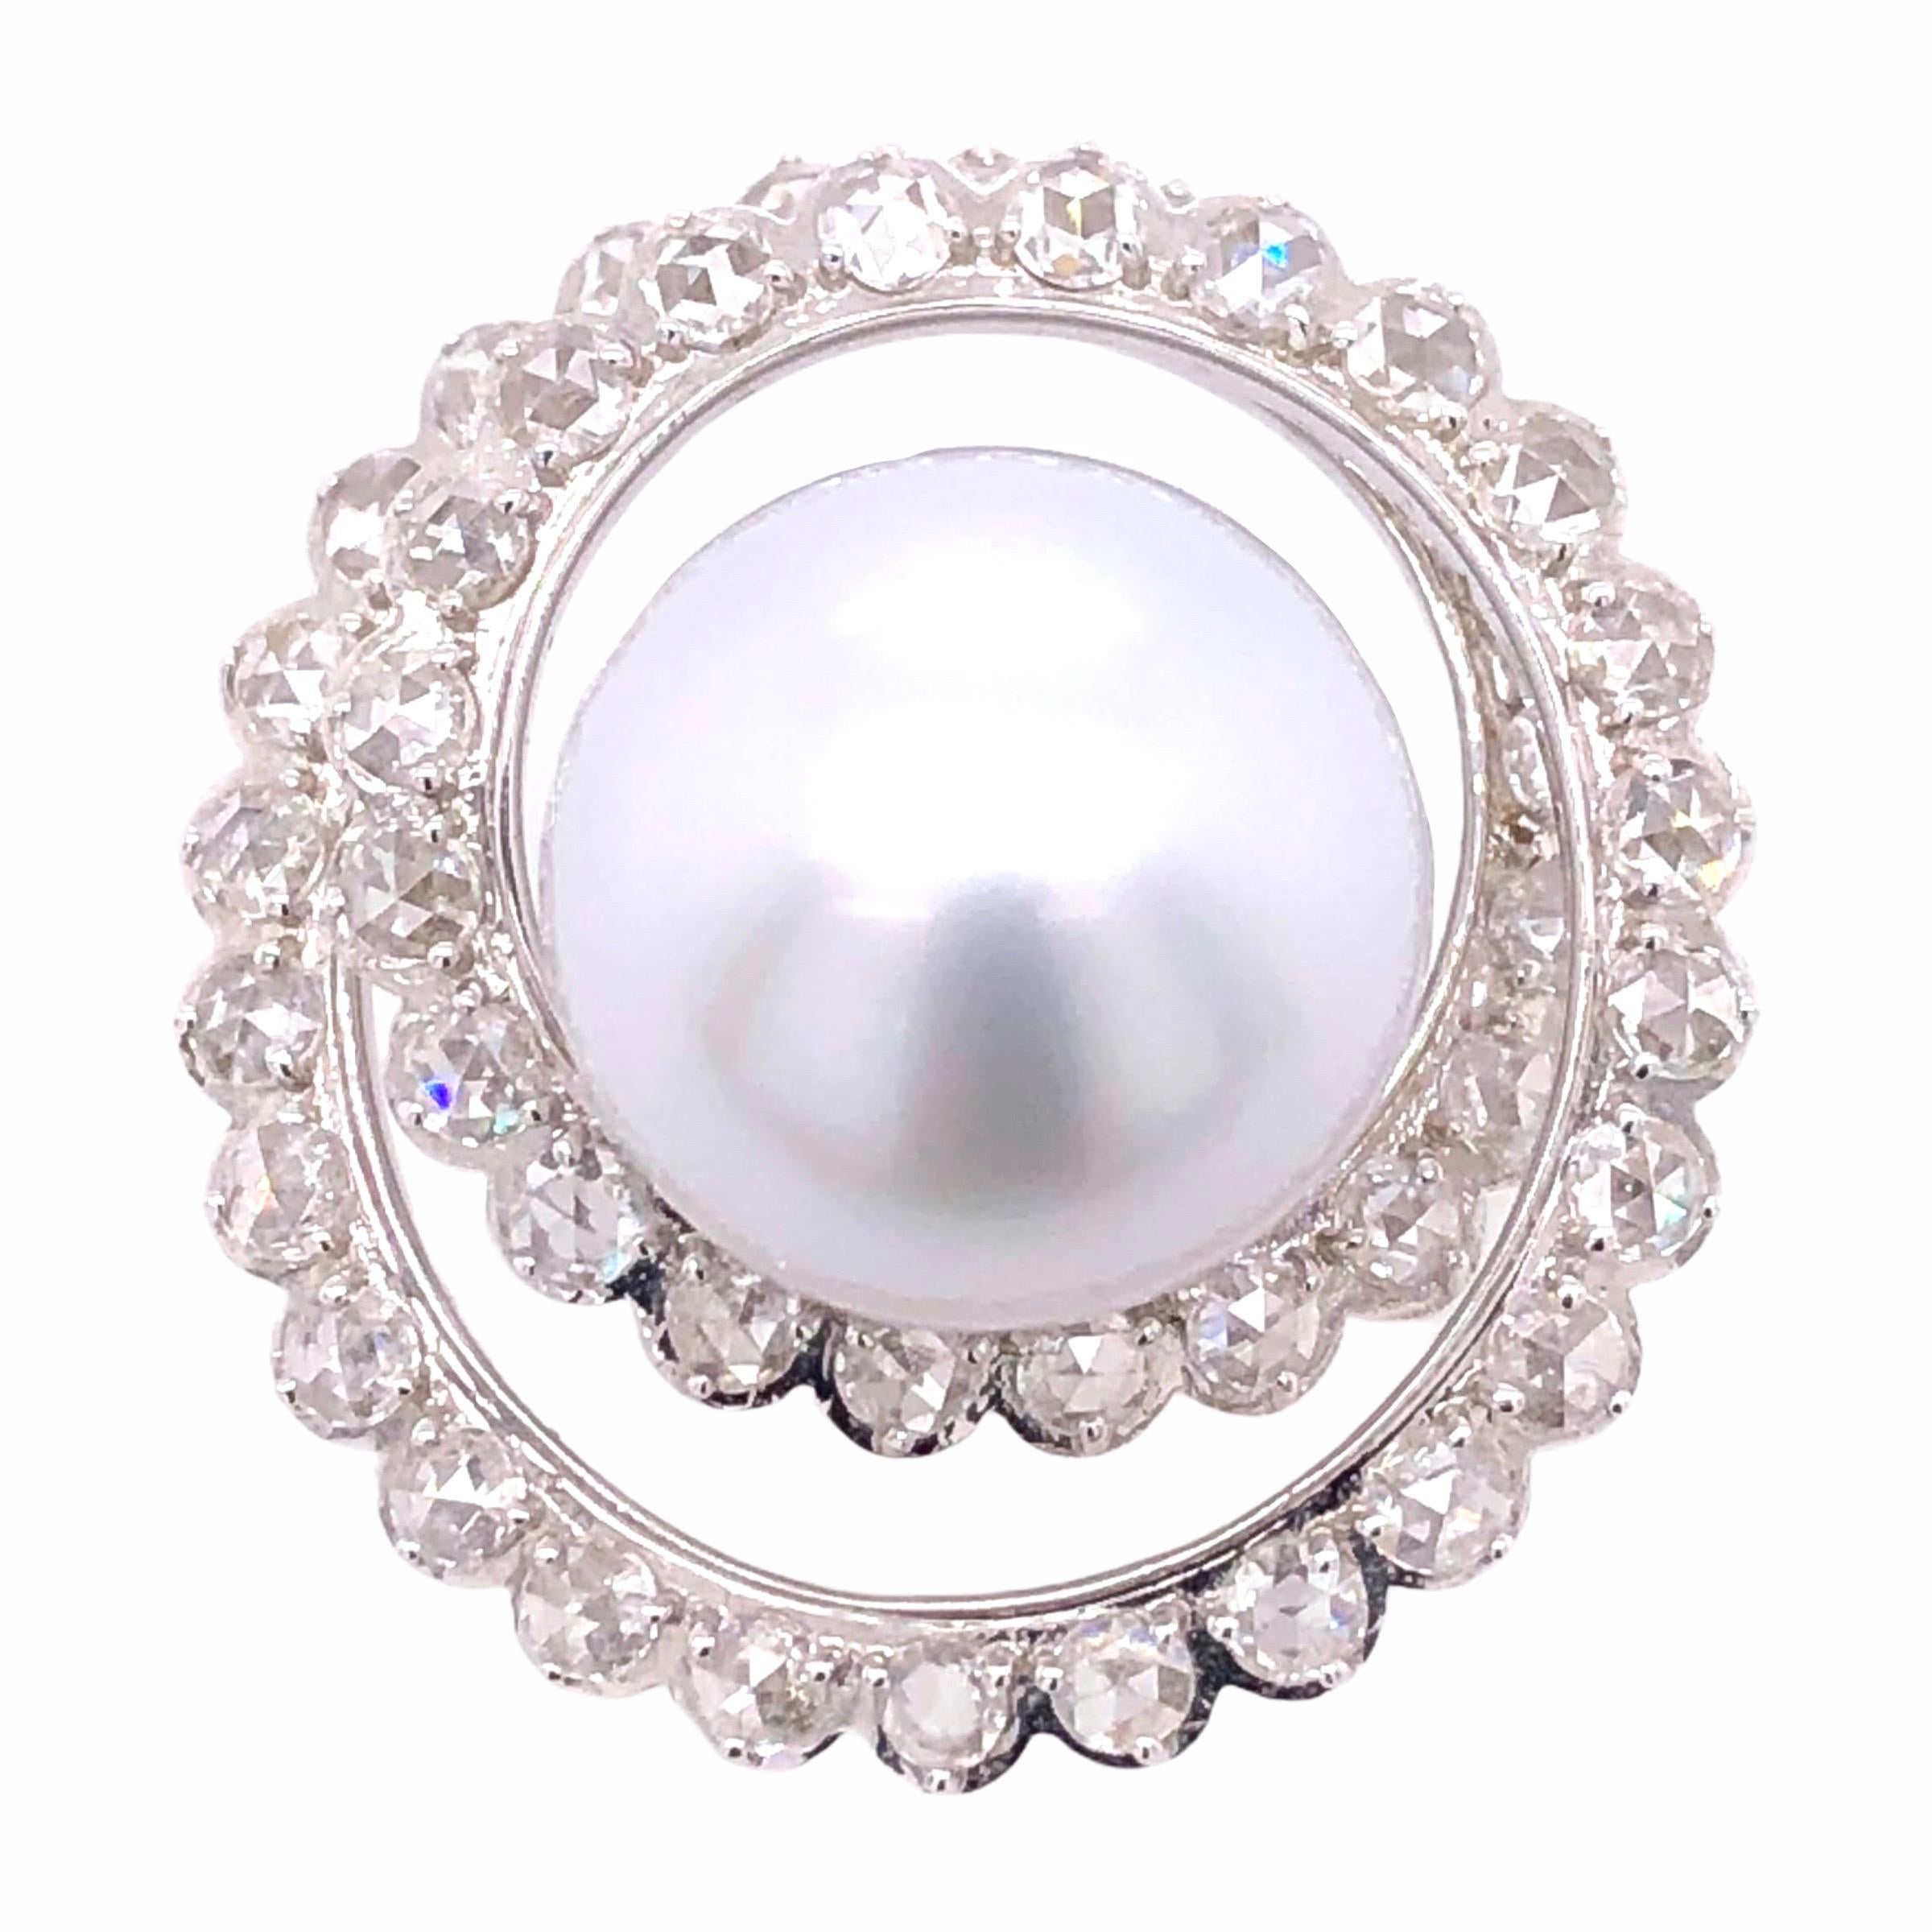 PARIS Craft House 14mm South Sea Pearl Diamond Pendant in 18 Karat White Gold.

- South Sea Pearl/14mm
- Round Diamonds
- 18K White Gold

Designed and crafted at PARIS Craft House.